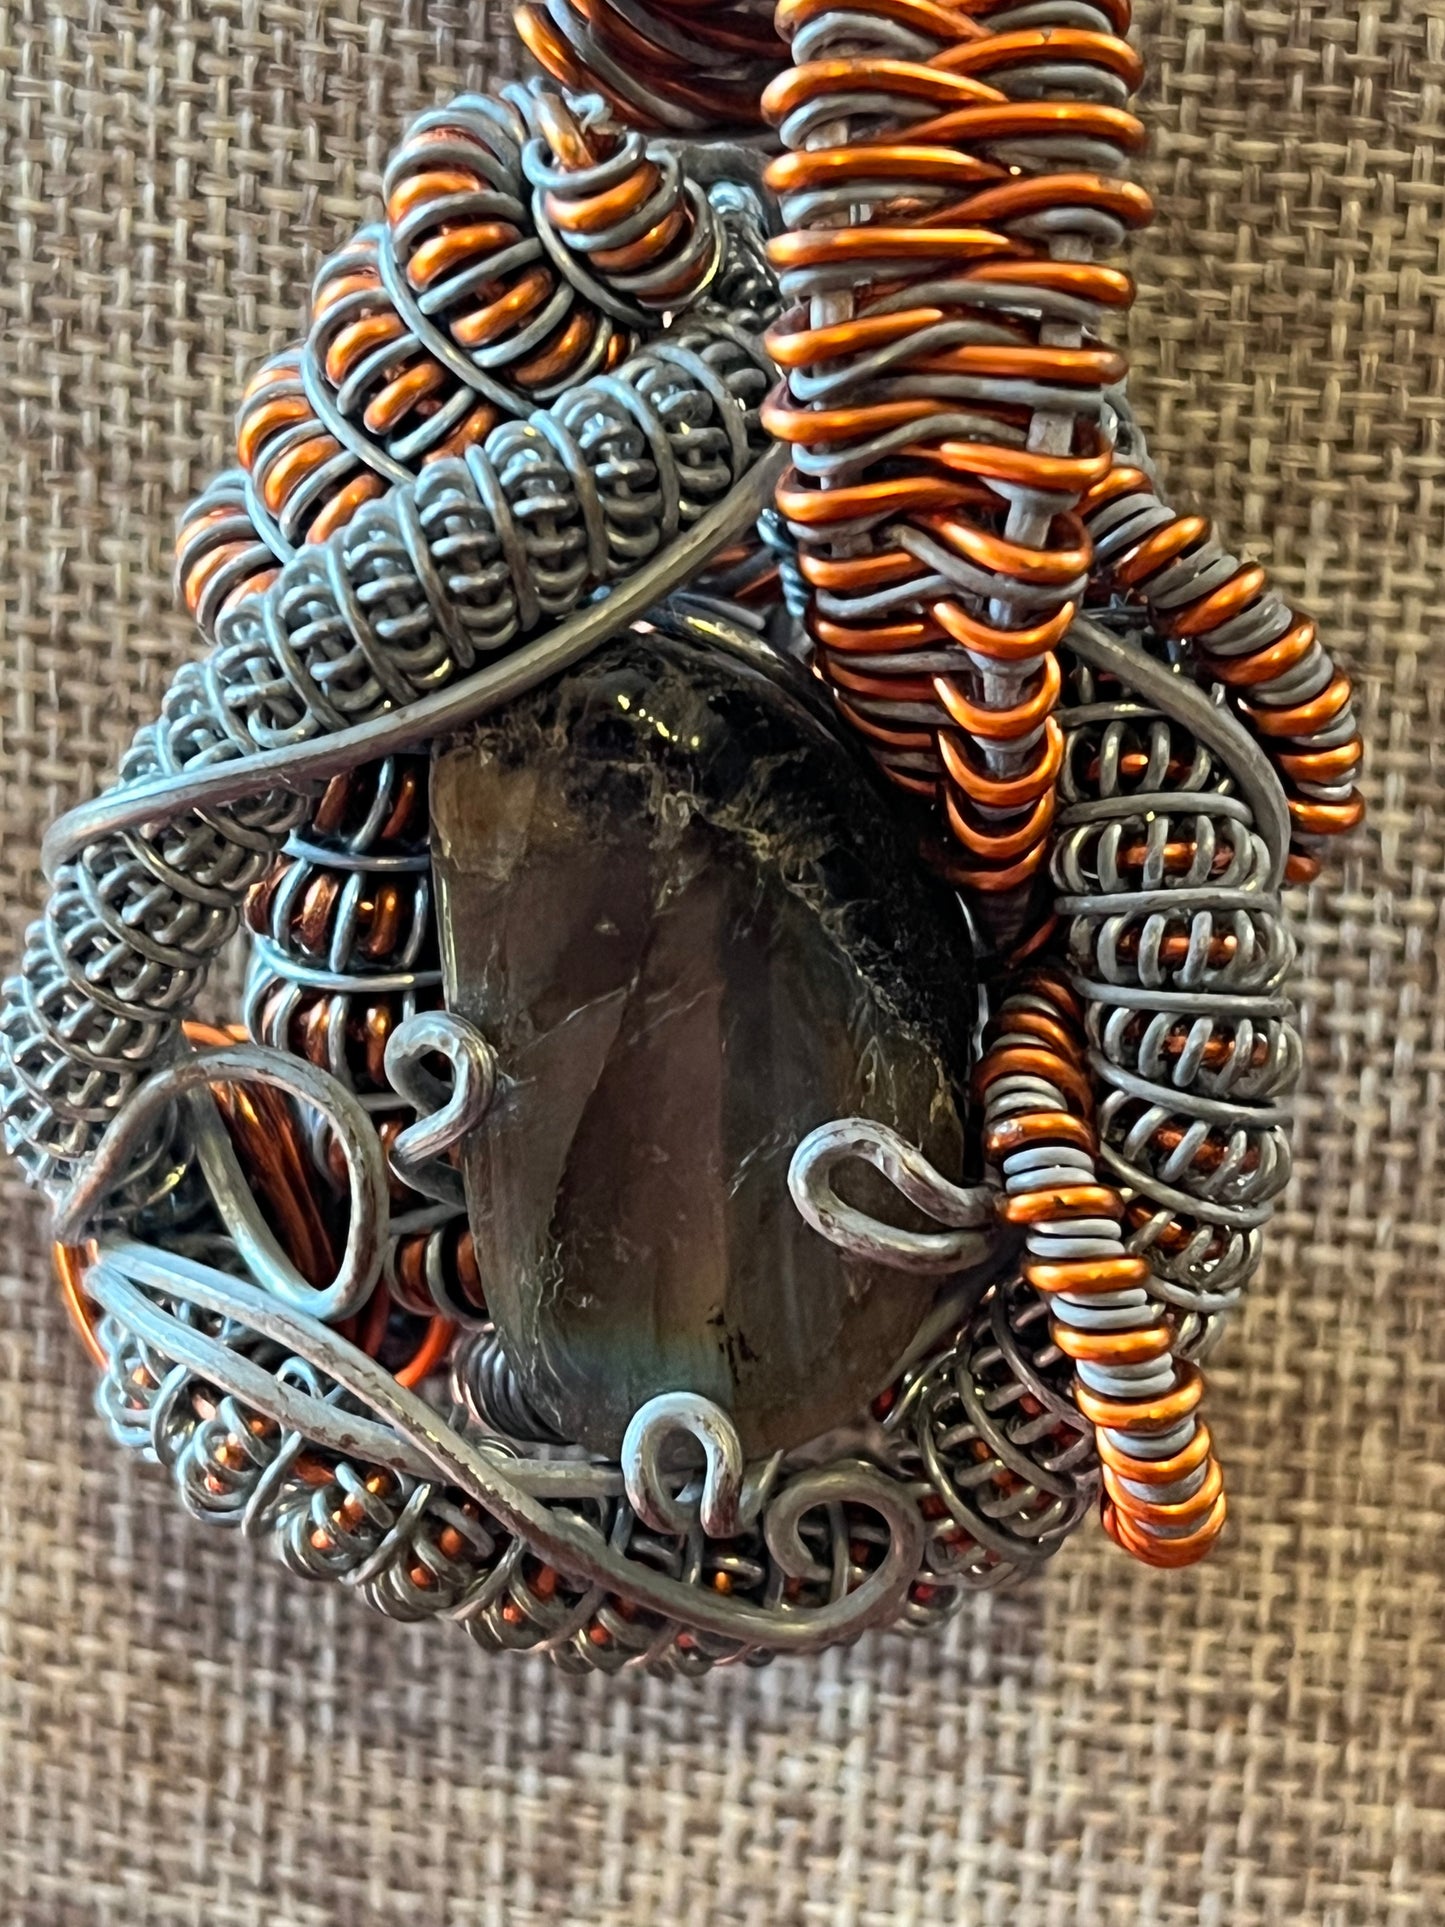 Handcrafted Labradorite, Copper, and Metal Pendant on Leather Cord